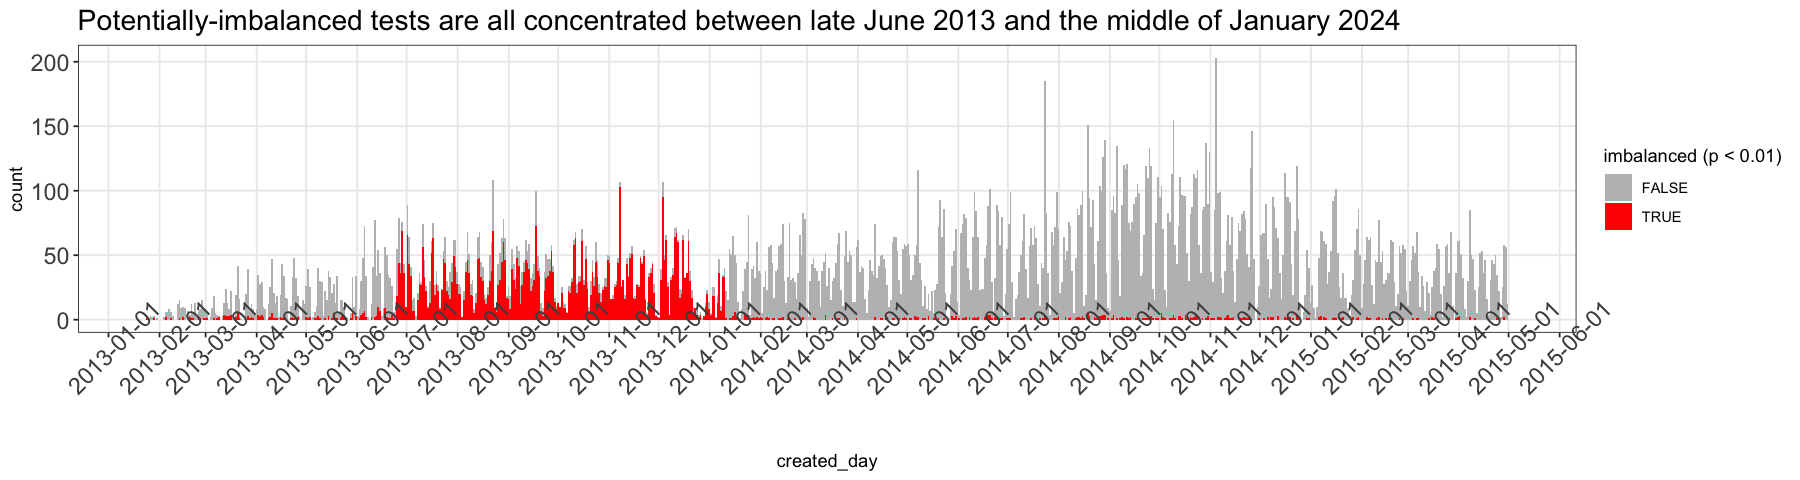 Potentially-imbalanced tests are all concentrated between late June 2013 and the middle of January 2024